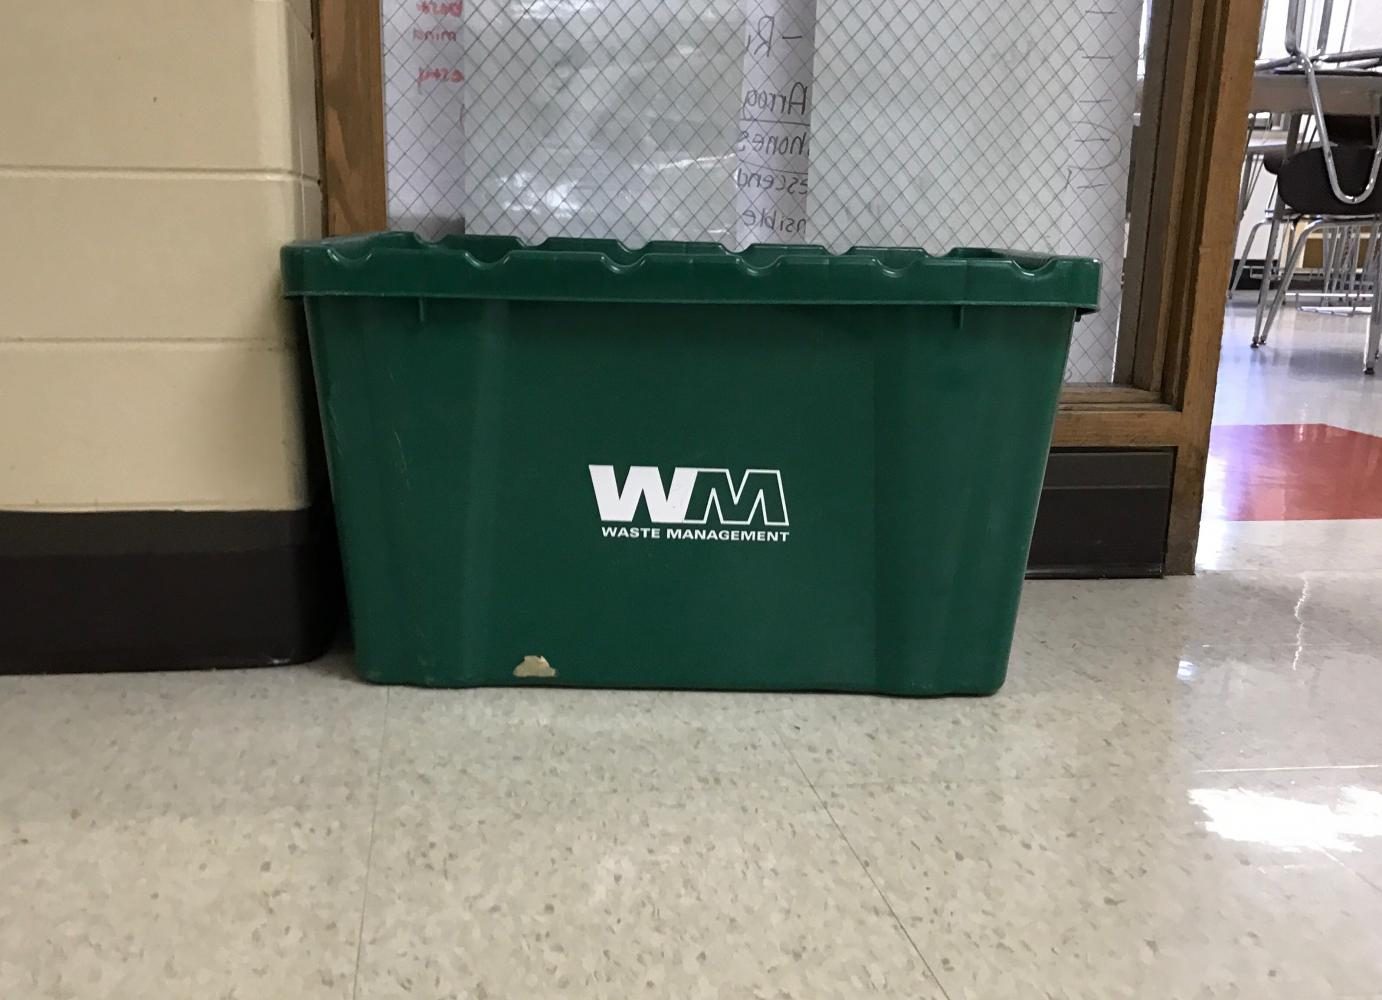 Part of the project will focus on increasing recycling at LHS. They plan to add more recycling bins around the school and bring more awareness to the importance of recycling.